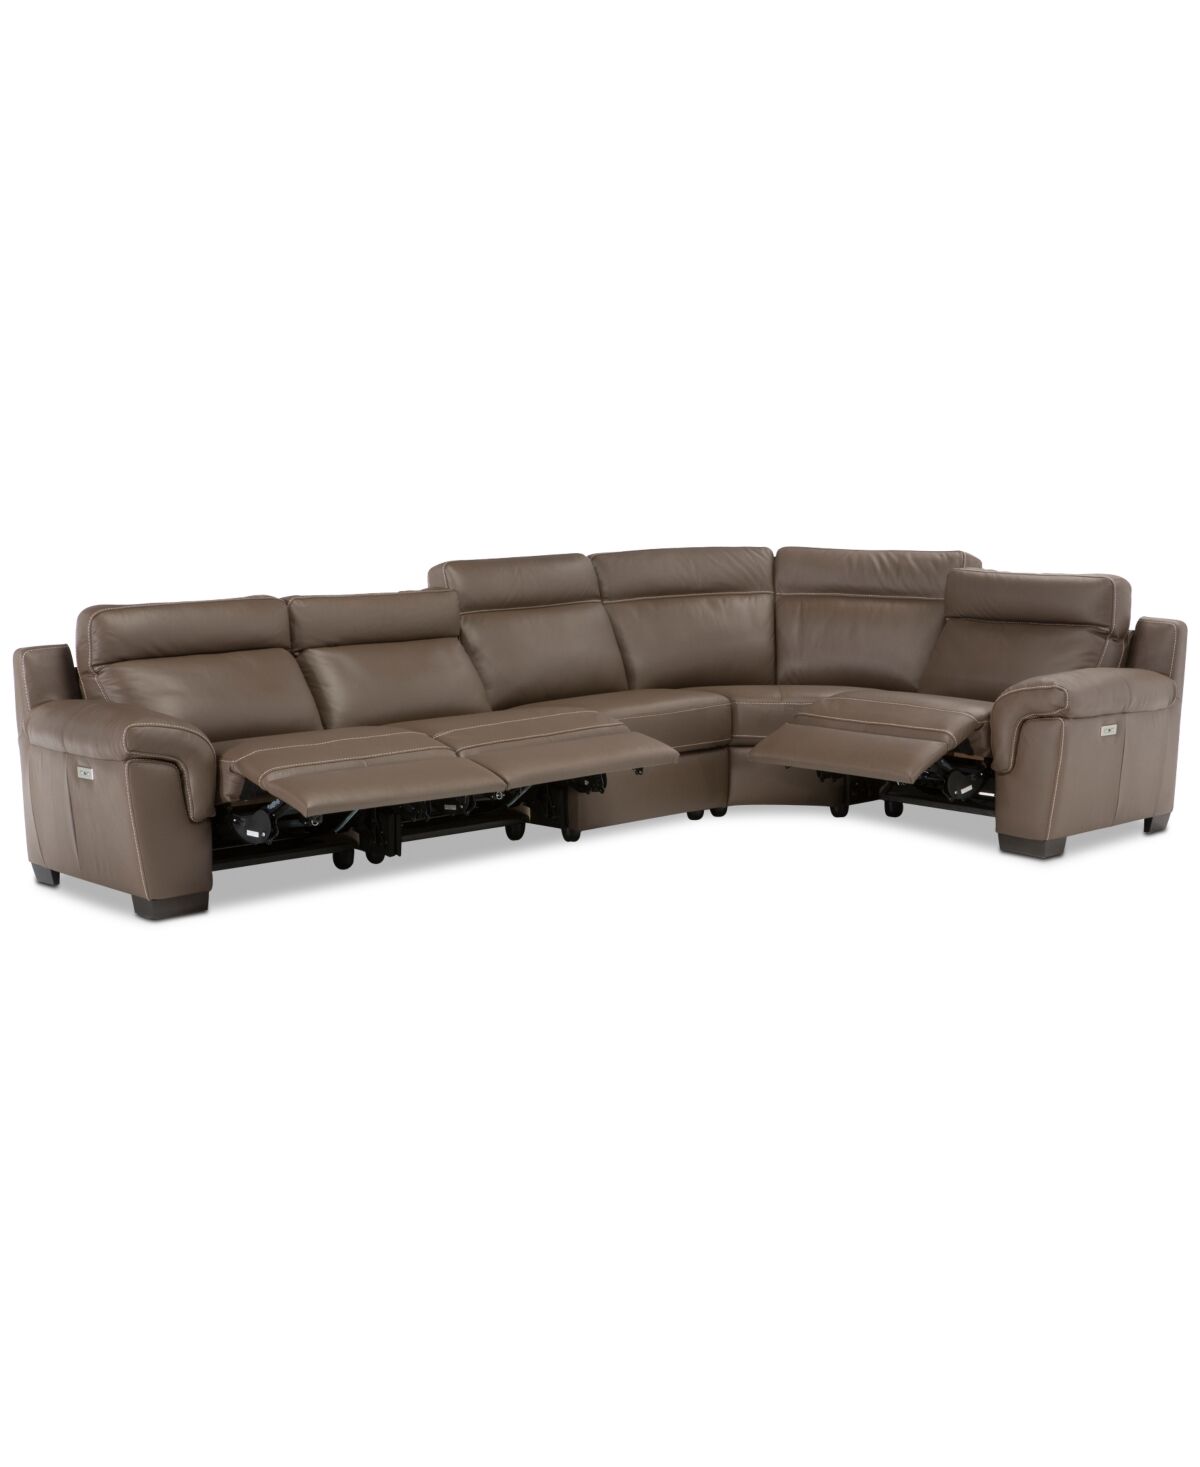 Furniture Julius Ii 5-Pc. Leather Sectional Sofa With 3 Power Recliners, Power Headrests & Usb Power Outlet, Created for Macy's - Dark Taupe